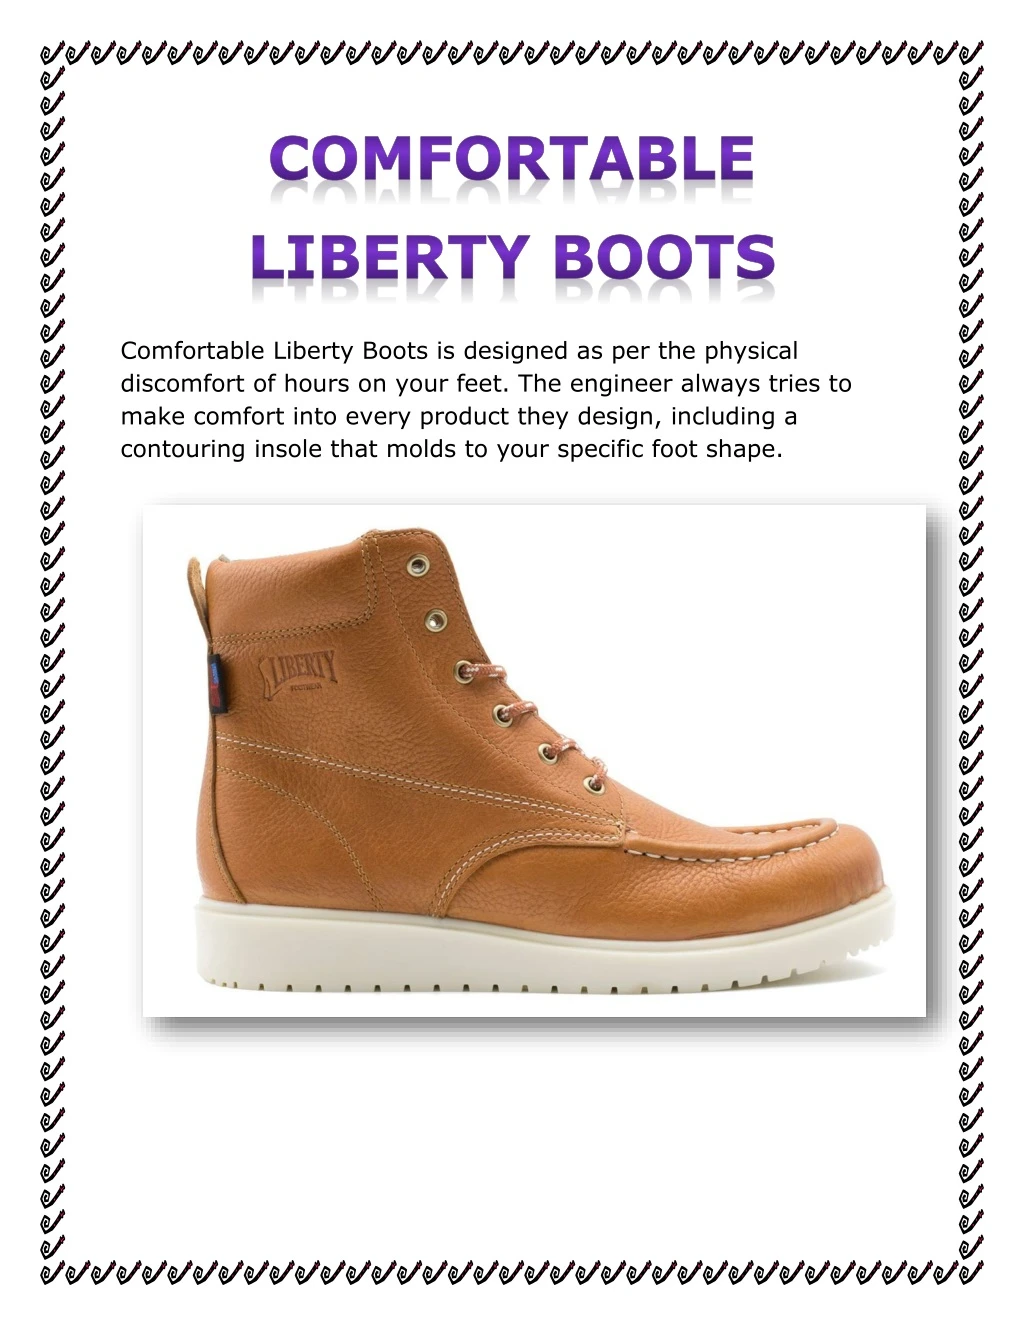 comfortable liberty boots is designed